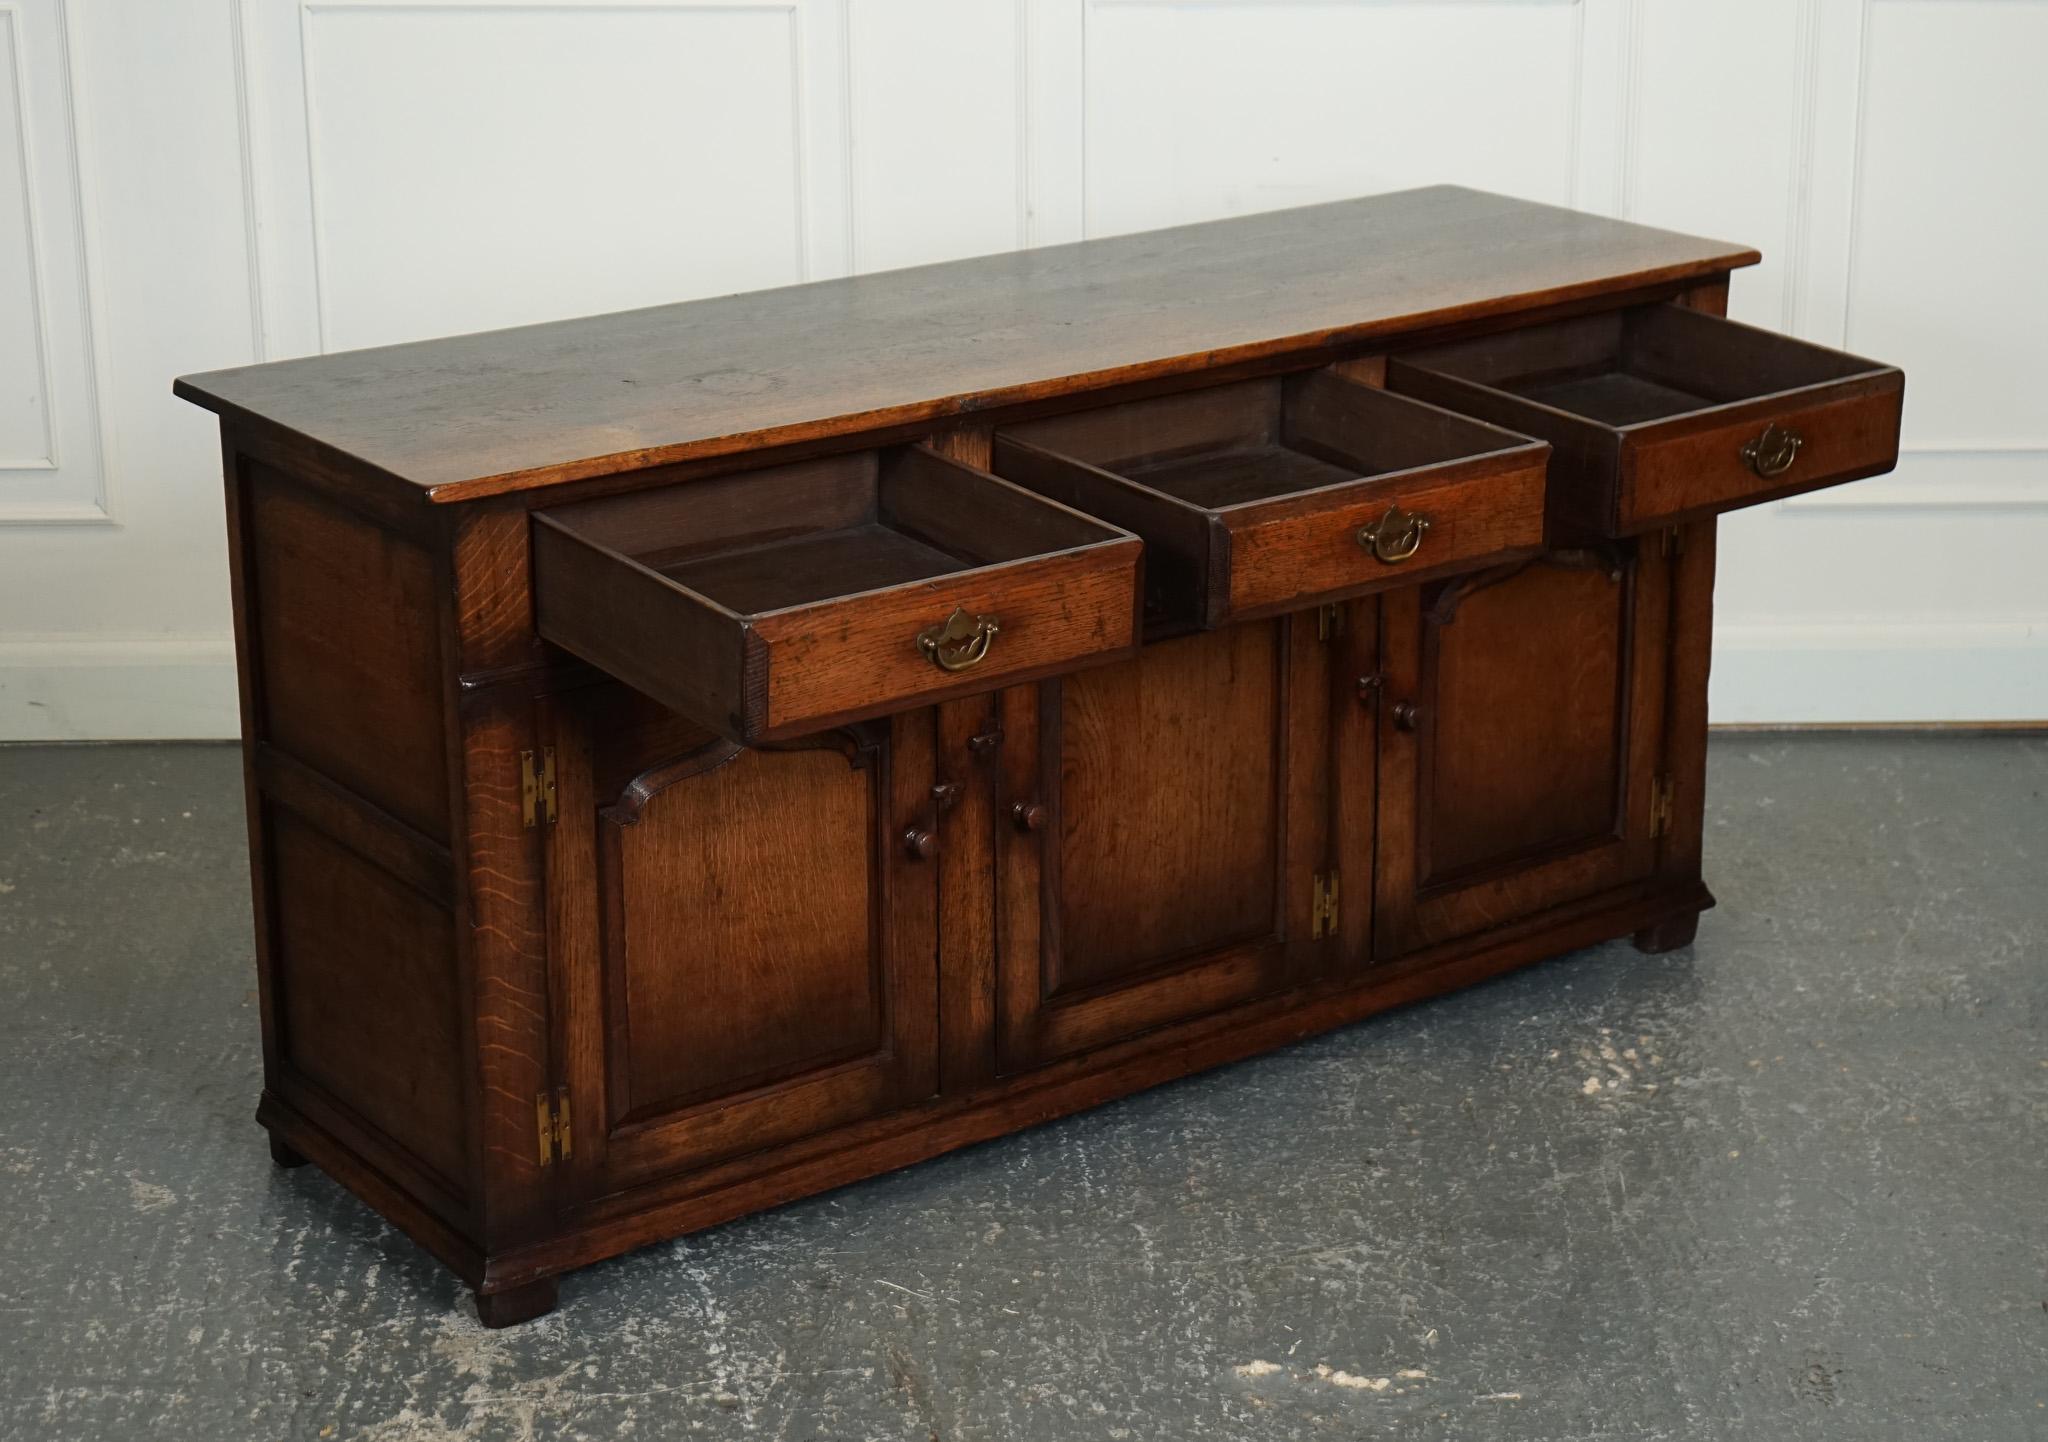 
We are delighted to offer for sale this Lovely Titchmarsh & Goodwin Solid Oak Sideboard.

The stunning late 20th-century Titchmarsh & Goodwin solid oak dresser sideboard is a showstopper of a piece that commands attention with its exceptional